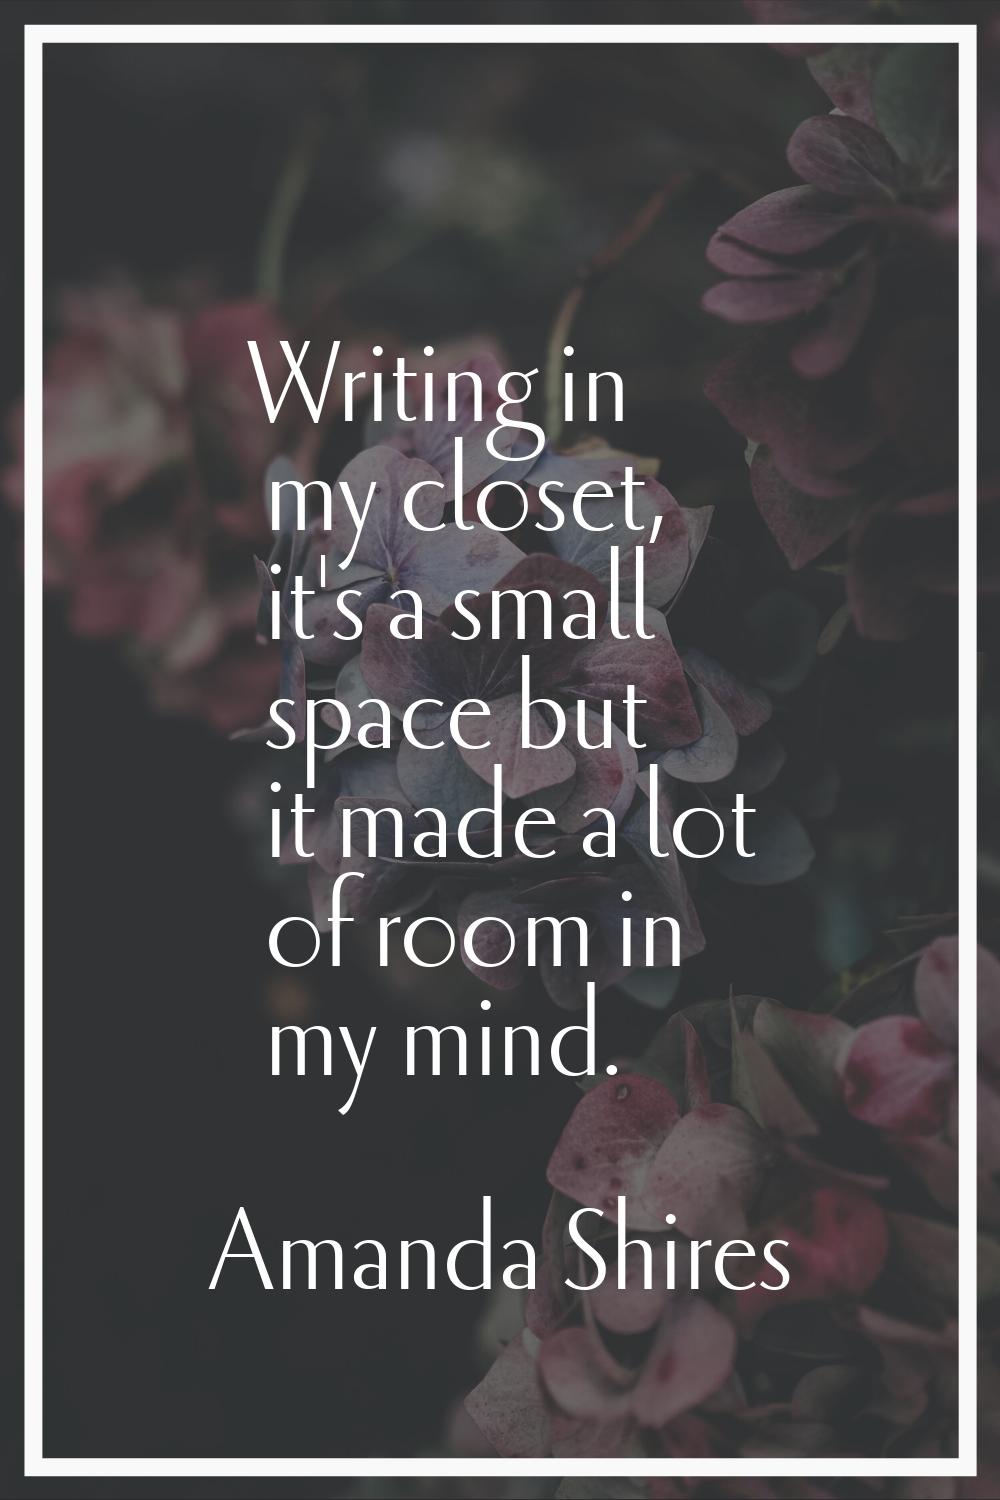 Writing in my closet, it's a small space but it made a lot of room in my mind.